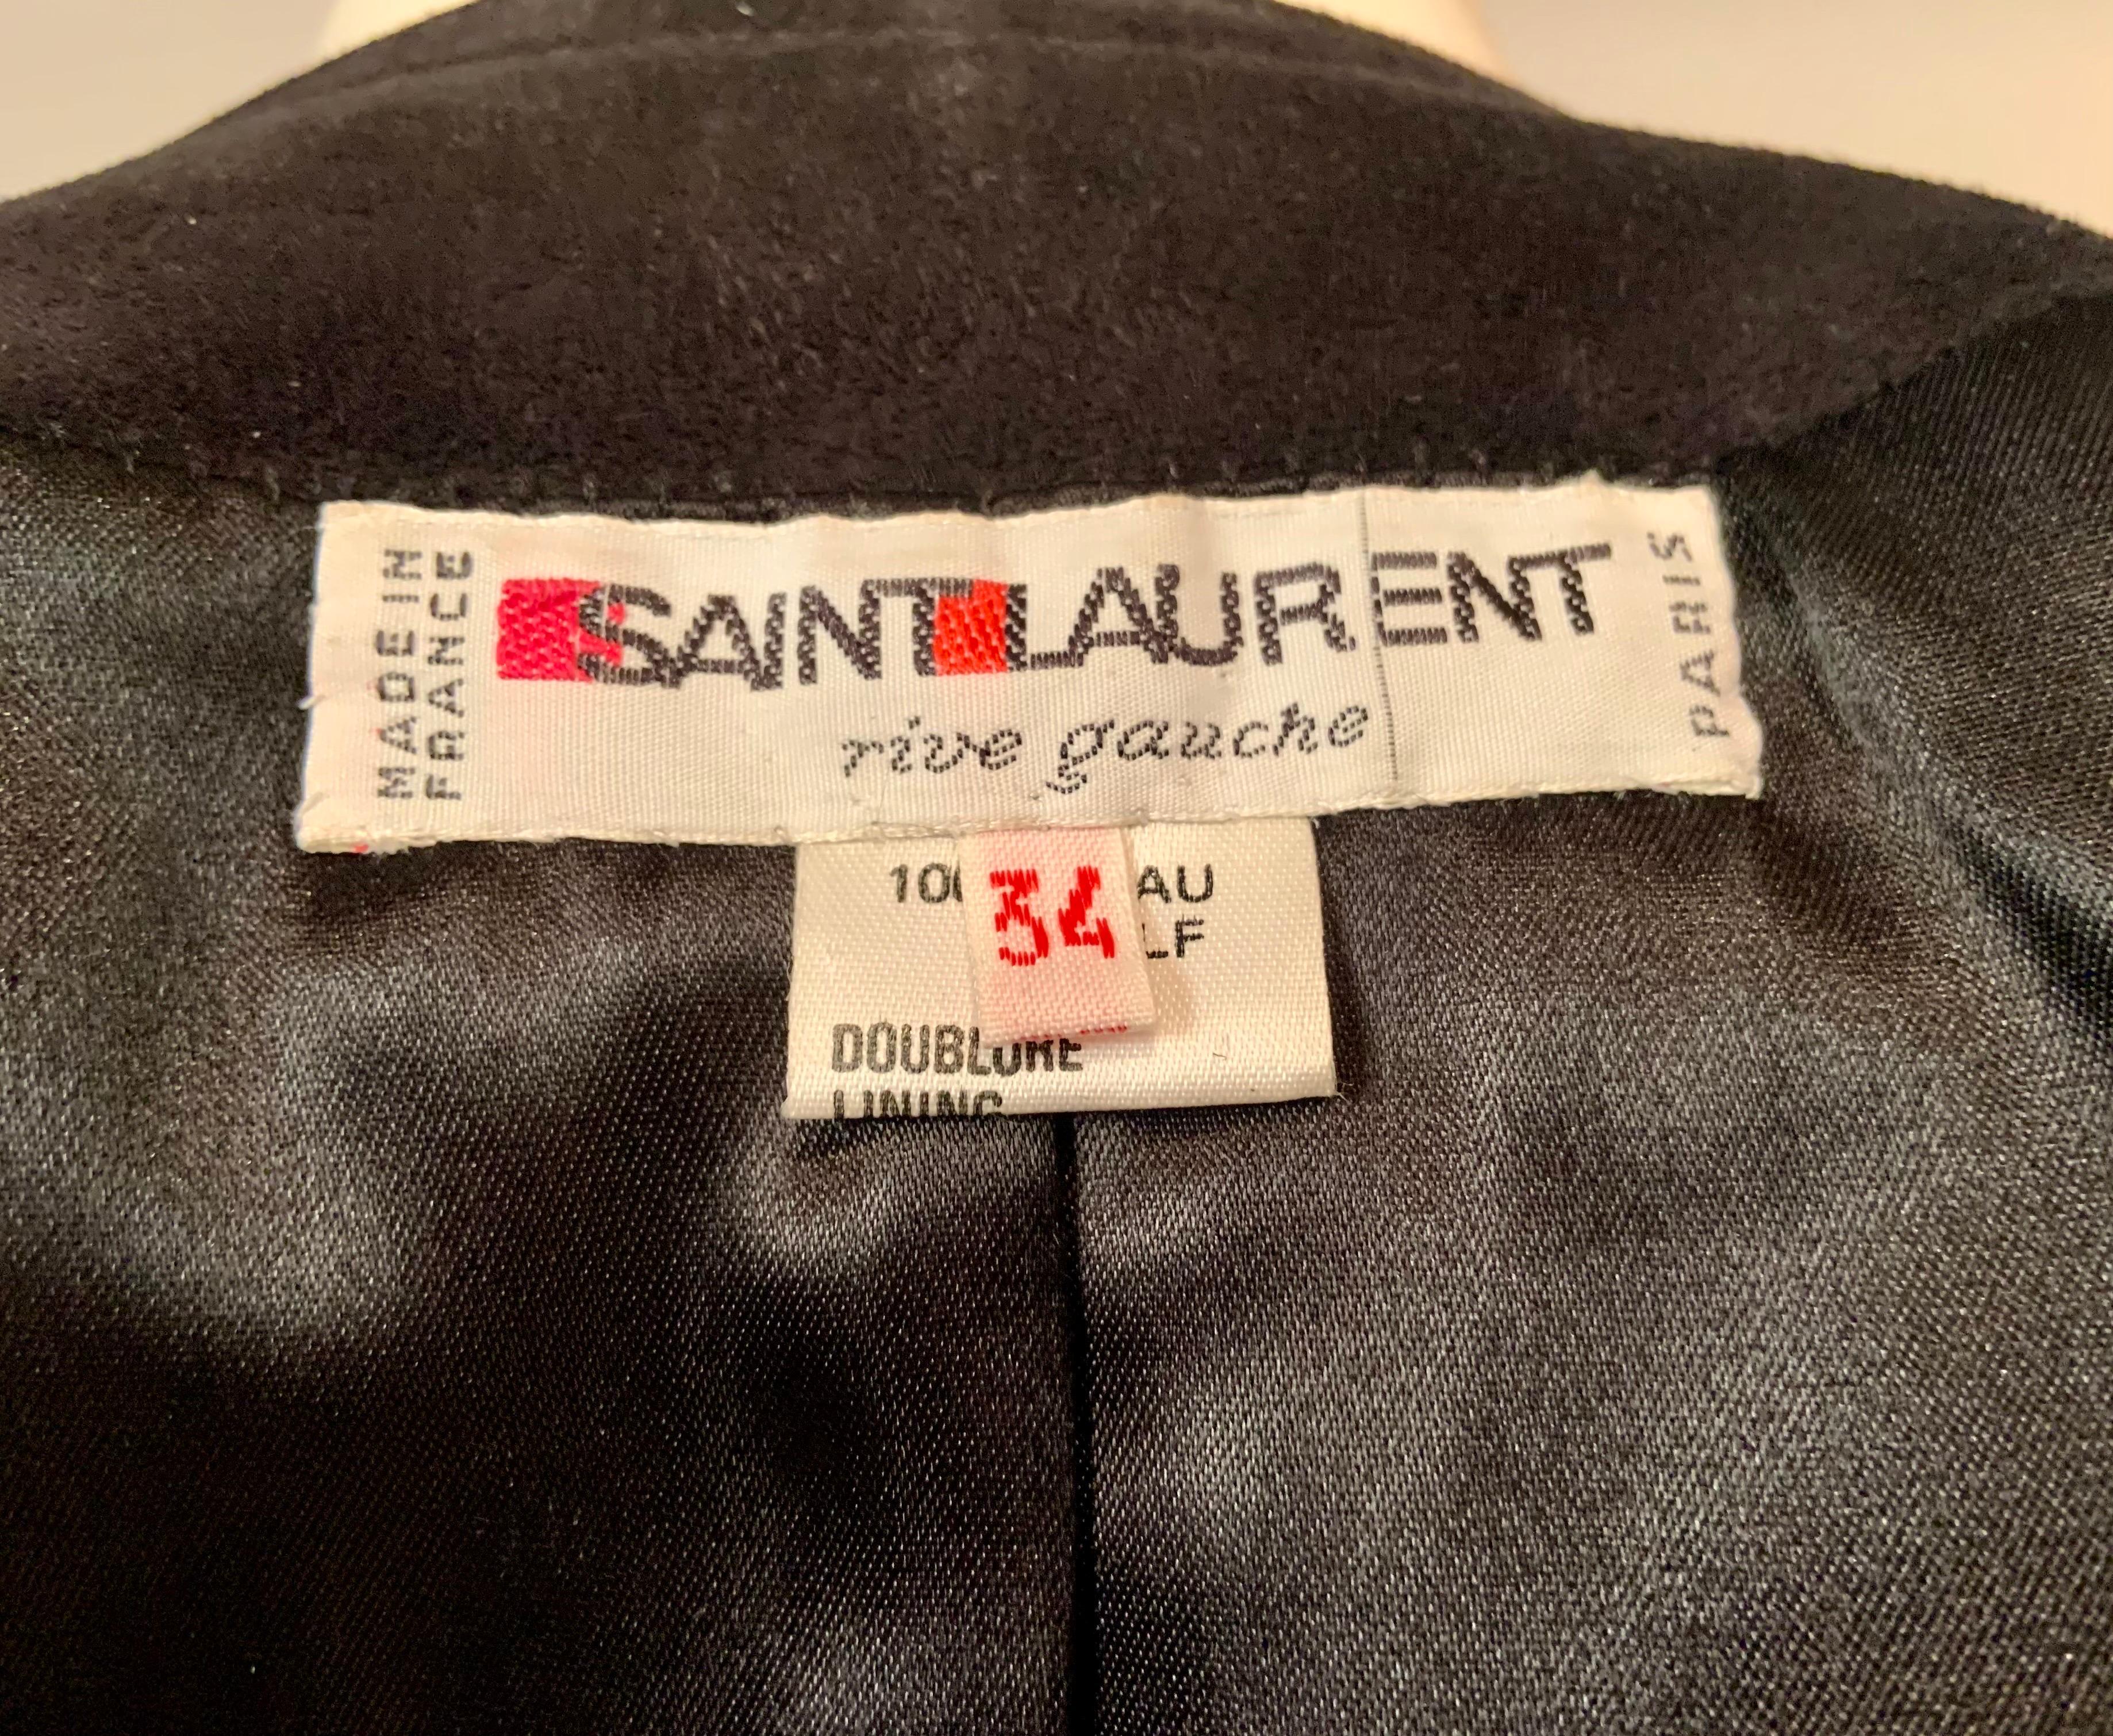 Yves Saint Laurent Black Suede Jacket with Gold Leather Trim For Sale 8